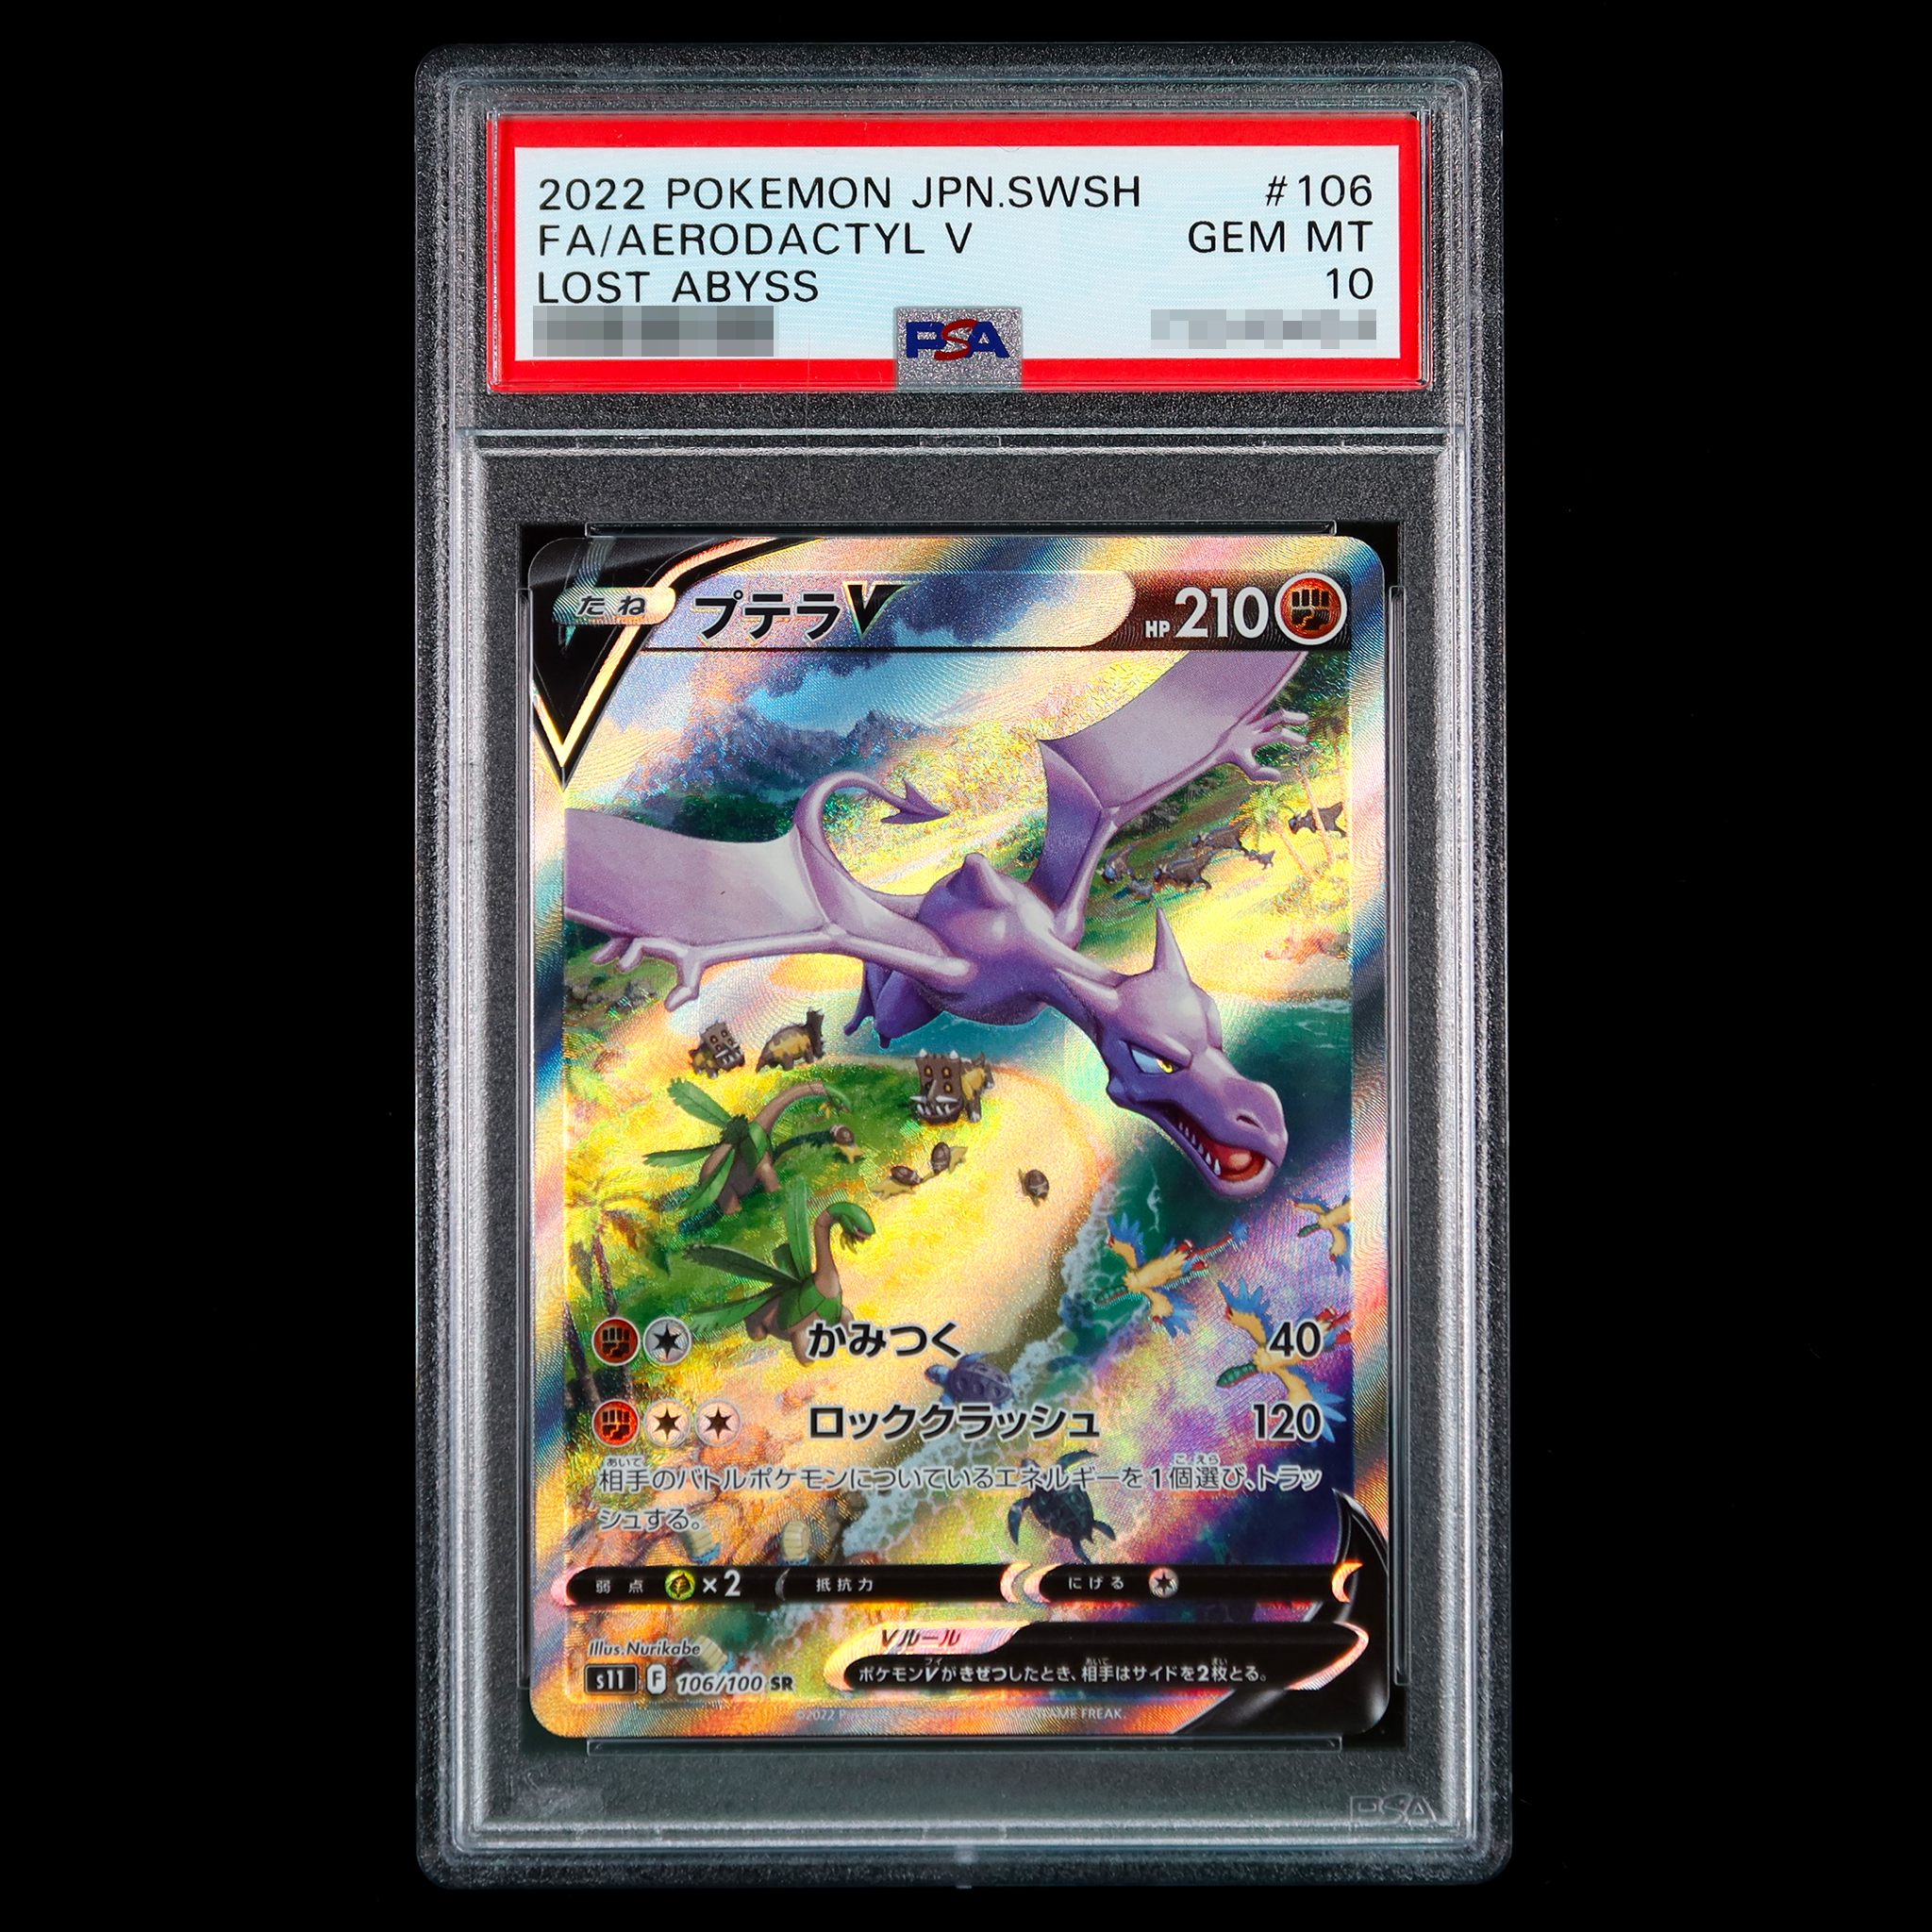 Aerodactyl V - S11 - Lost Abyss card S11 056/100